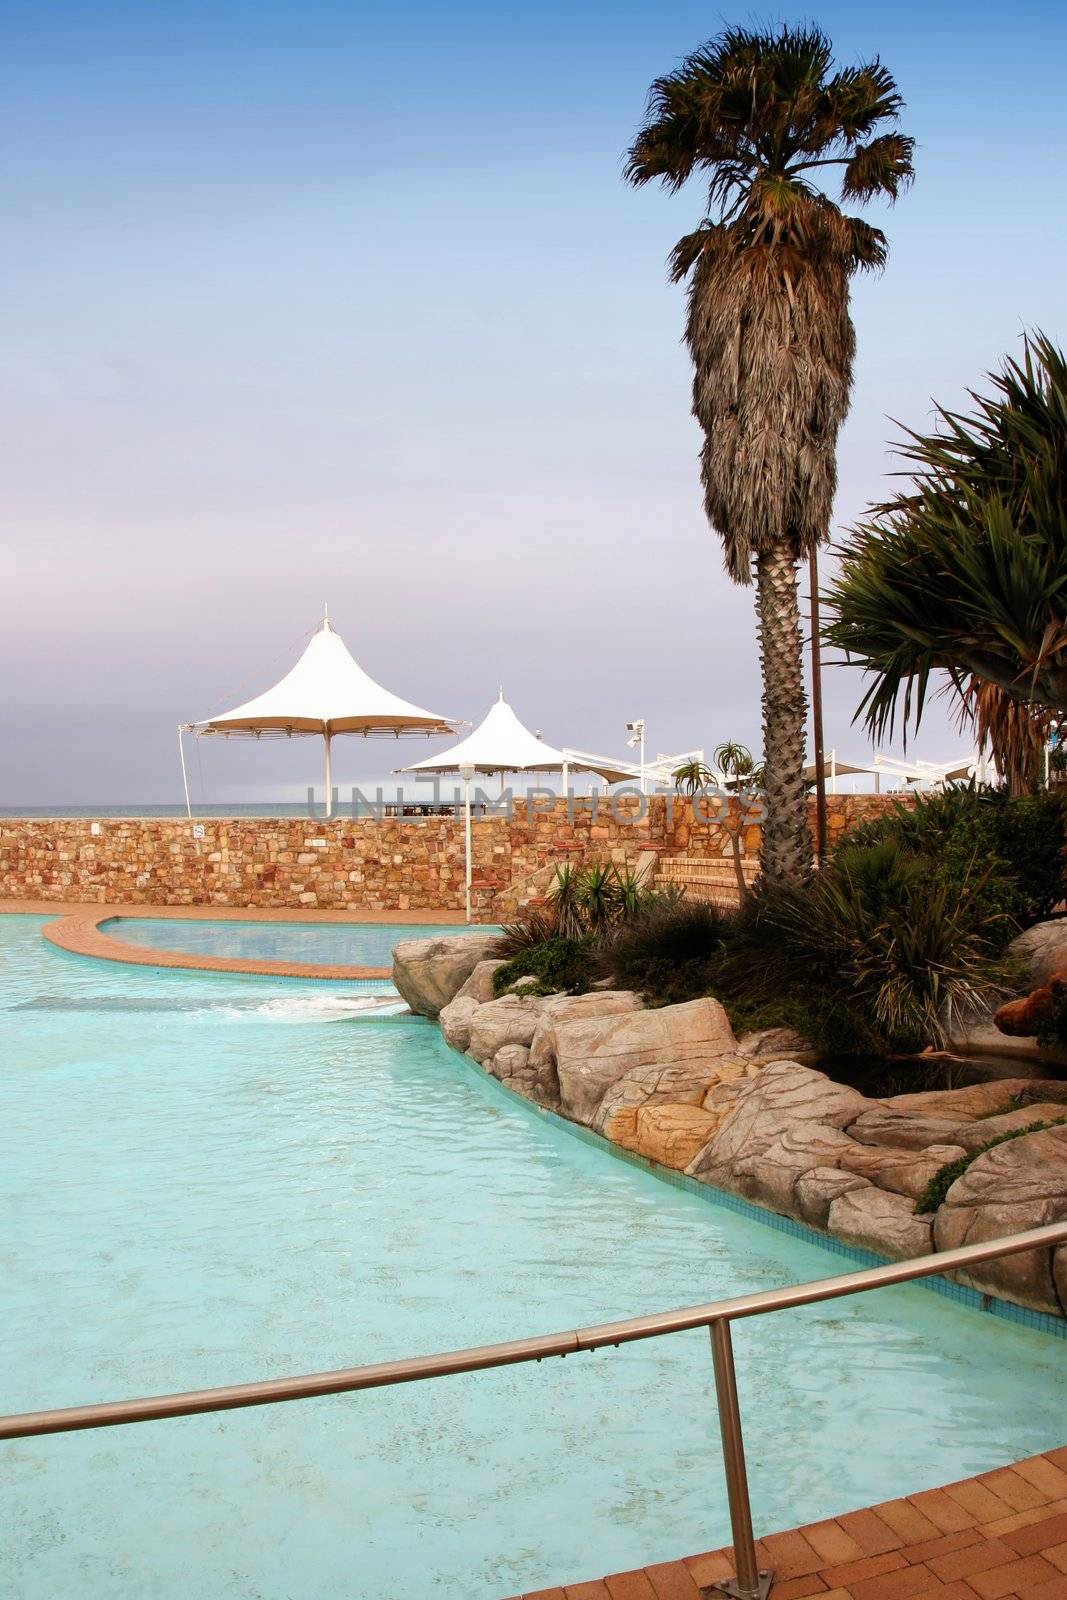 Swimming pools at a tourist destination in Port Elizabeth, South Africa